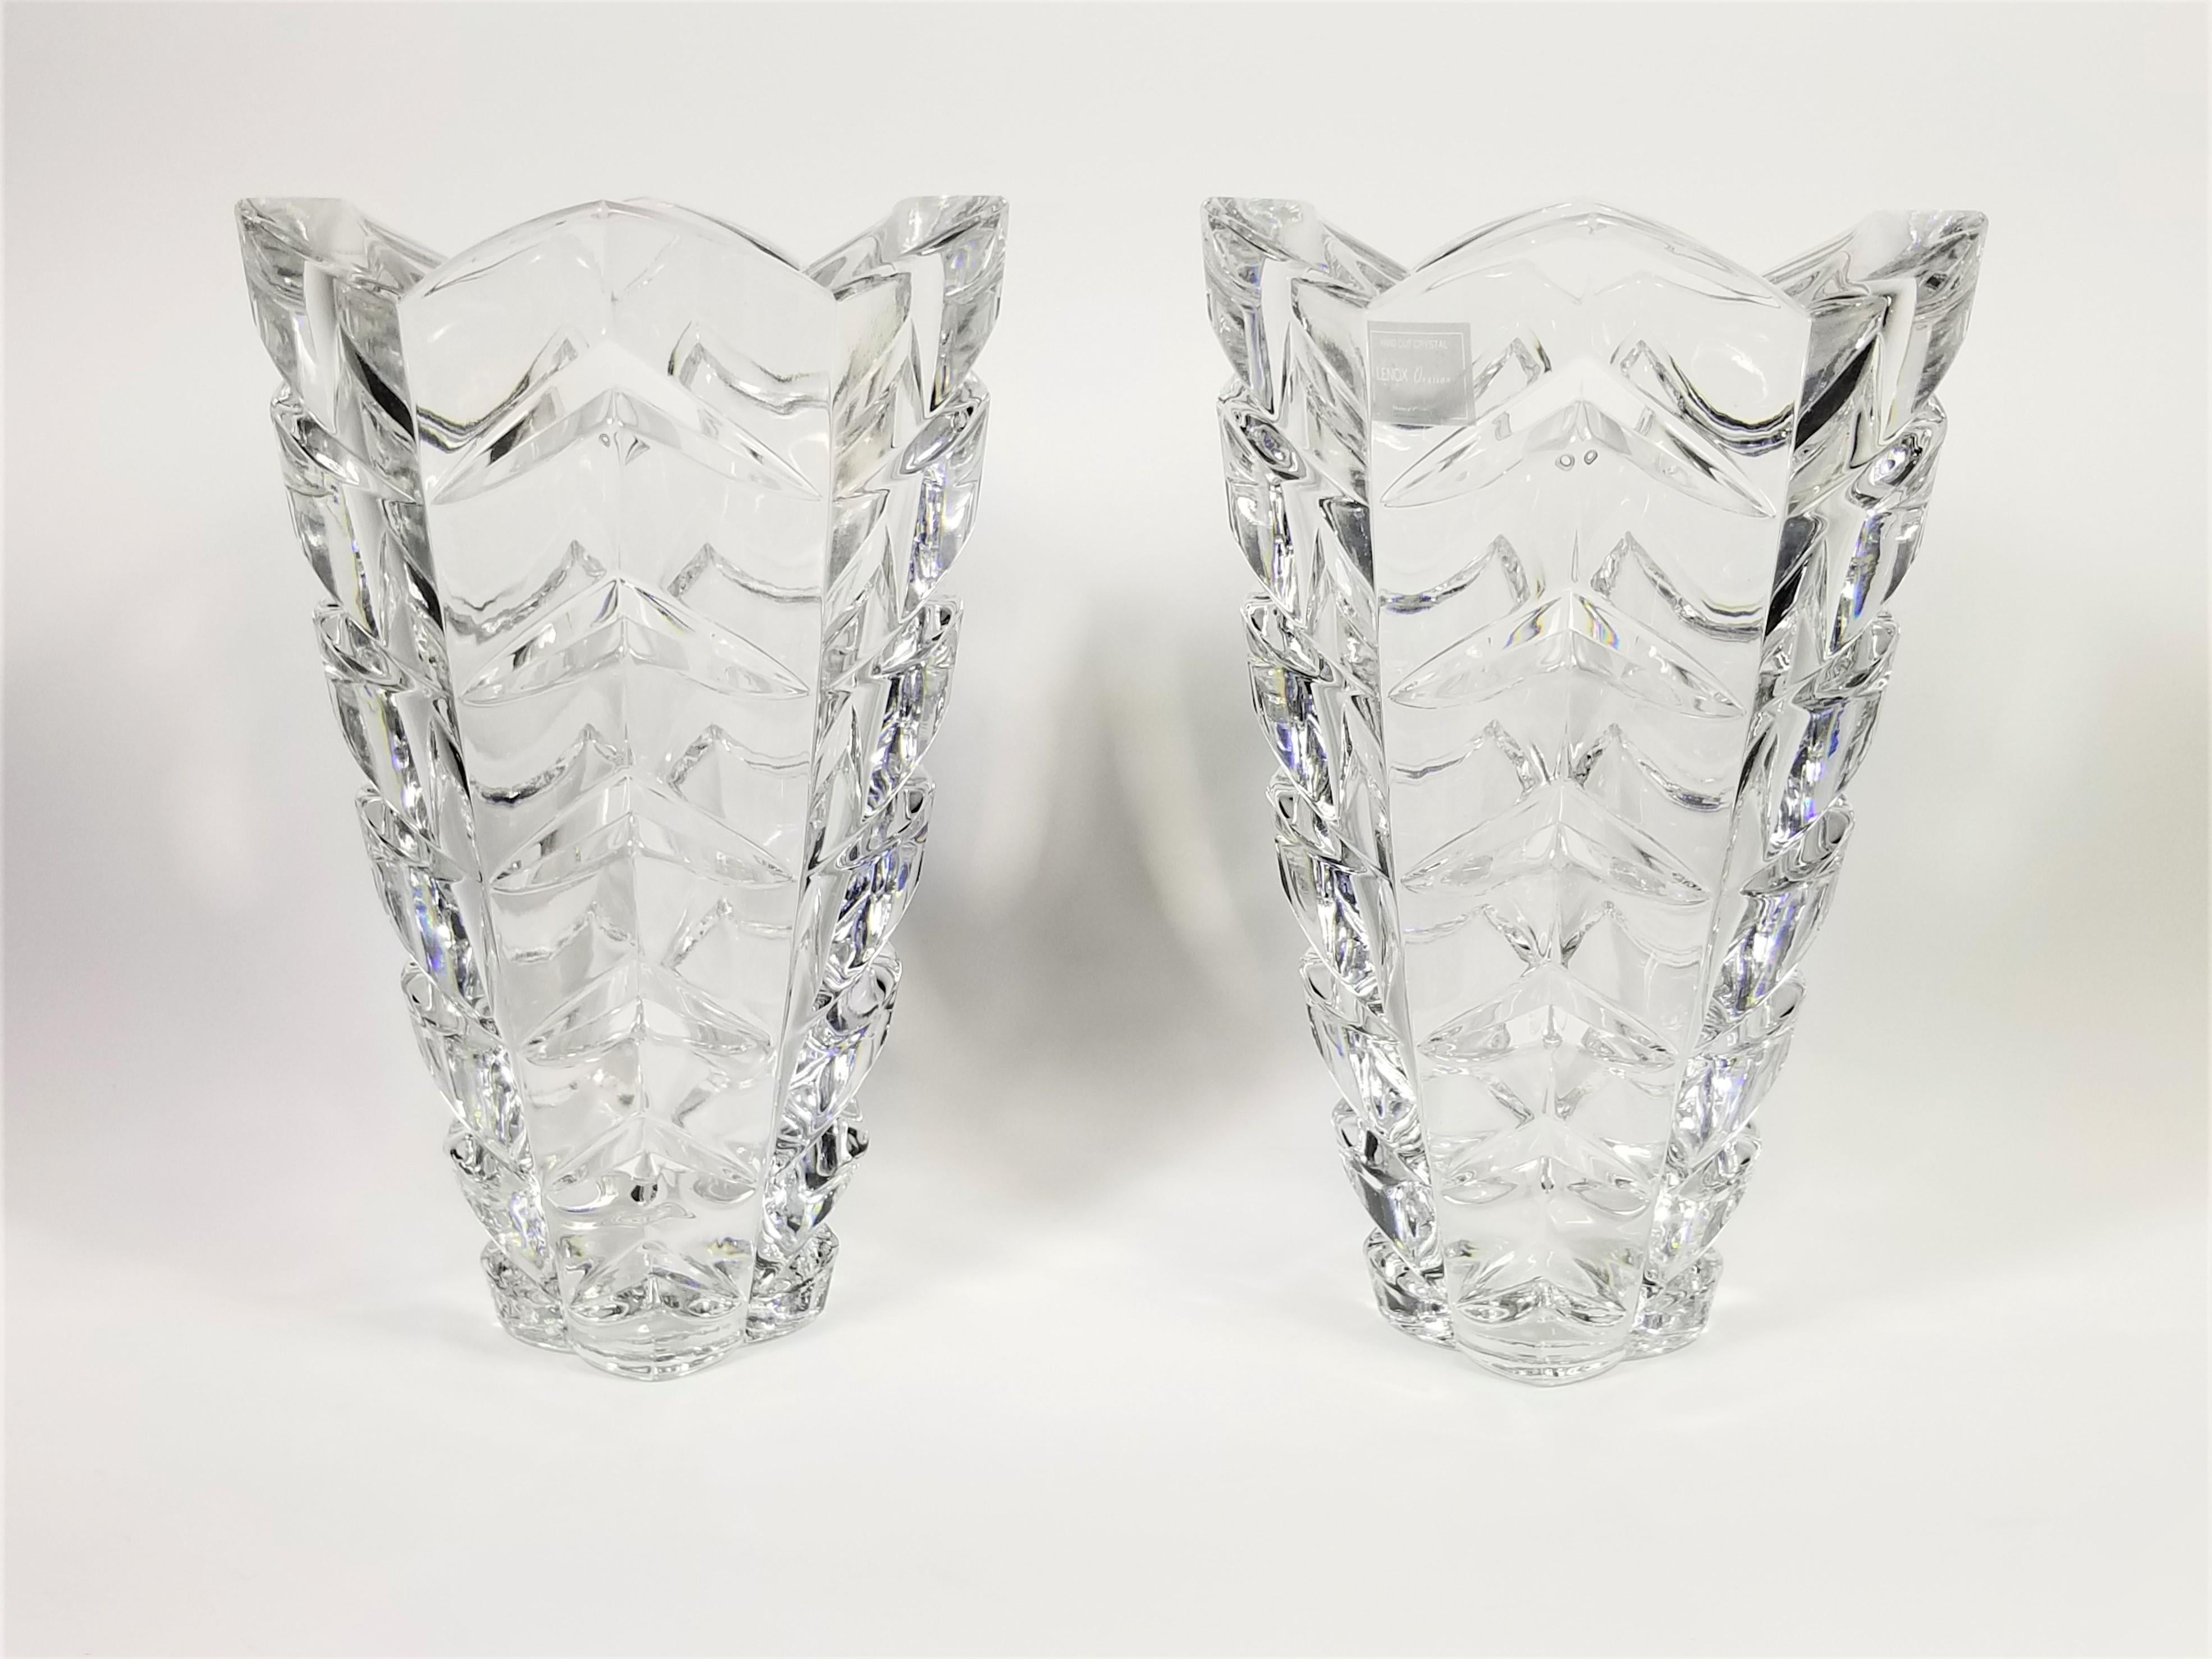 Pair or Hand Cut Crystal Vases by Lenox. Made in Germany. Heavy Substantial Weight. Art Deco Design. Still retains original marking stickers. Excellent Condition. 